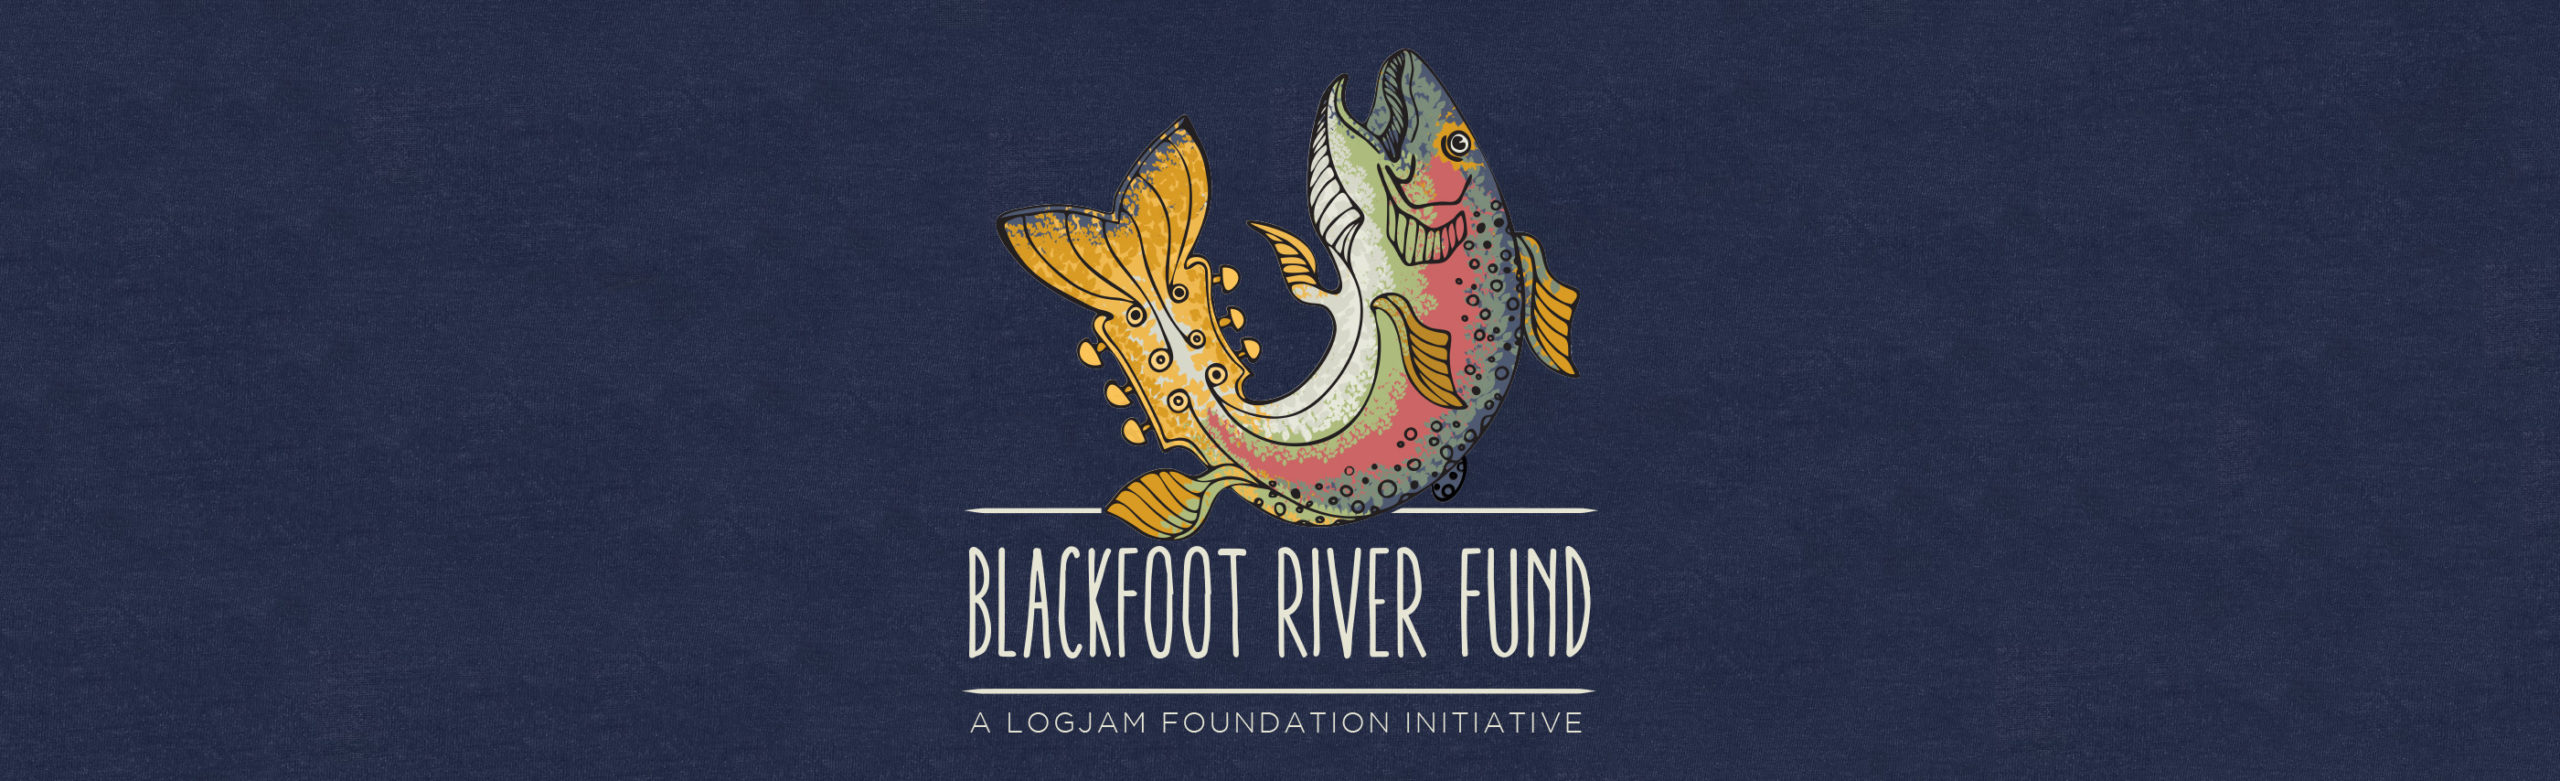 New Blackfoot River Fund Merchandise Has Arrived Image